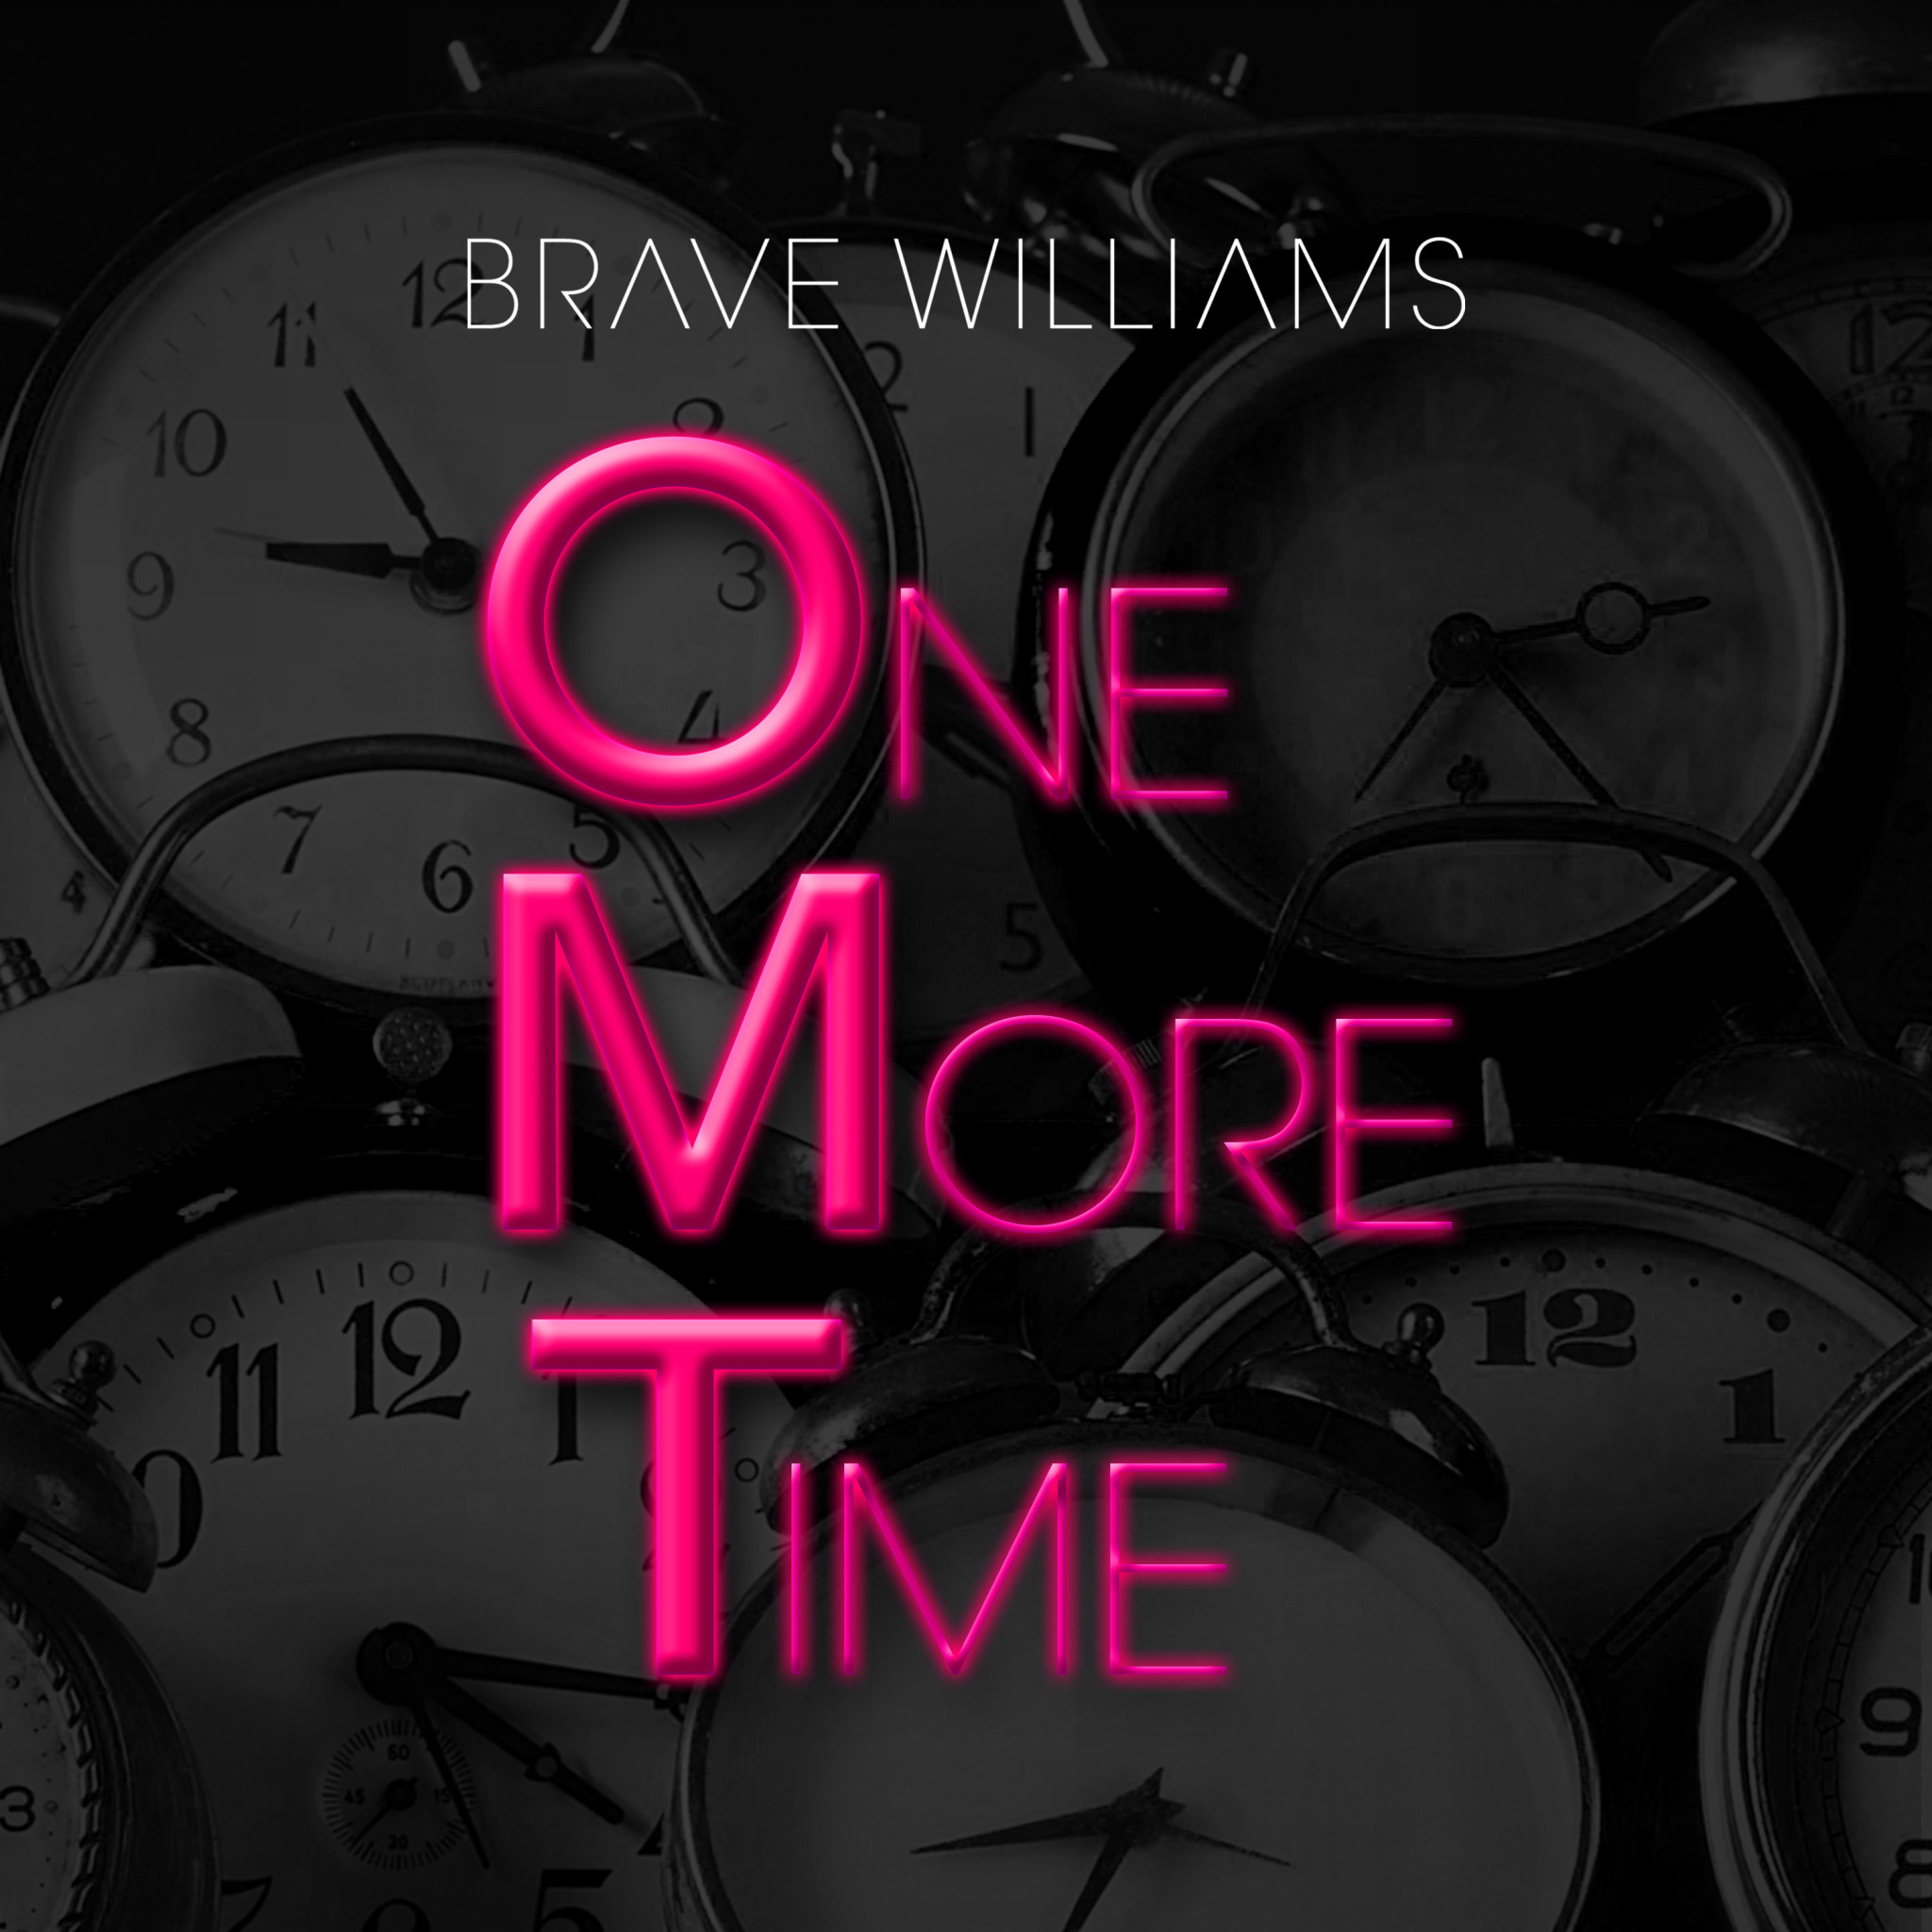 New Music: Brave Williams “OMT (One More Time)”